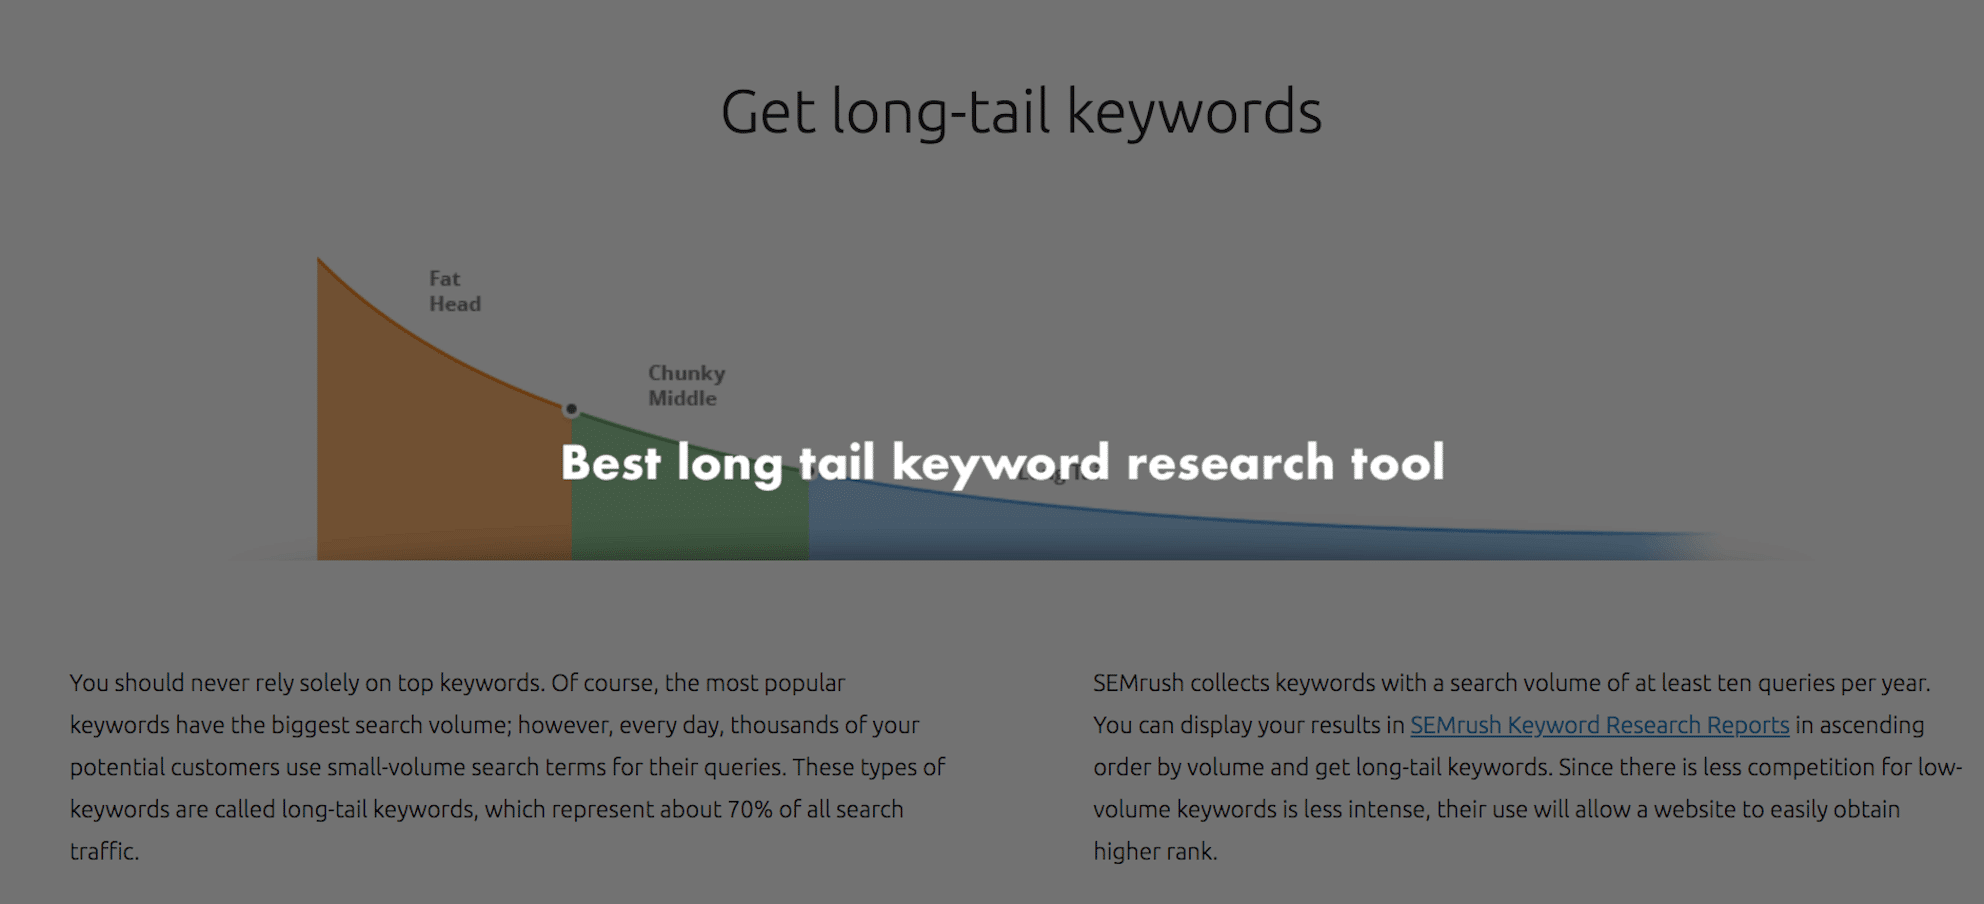 Best long tail keyword research tool